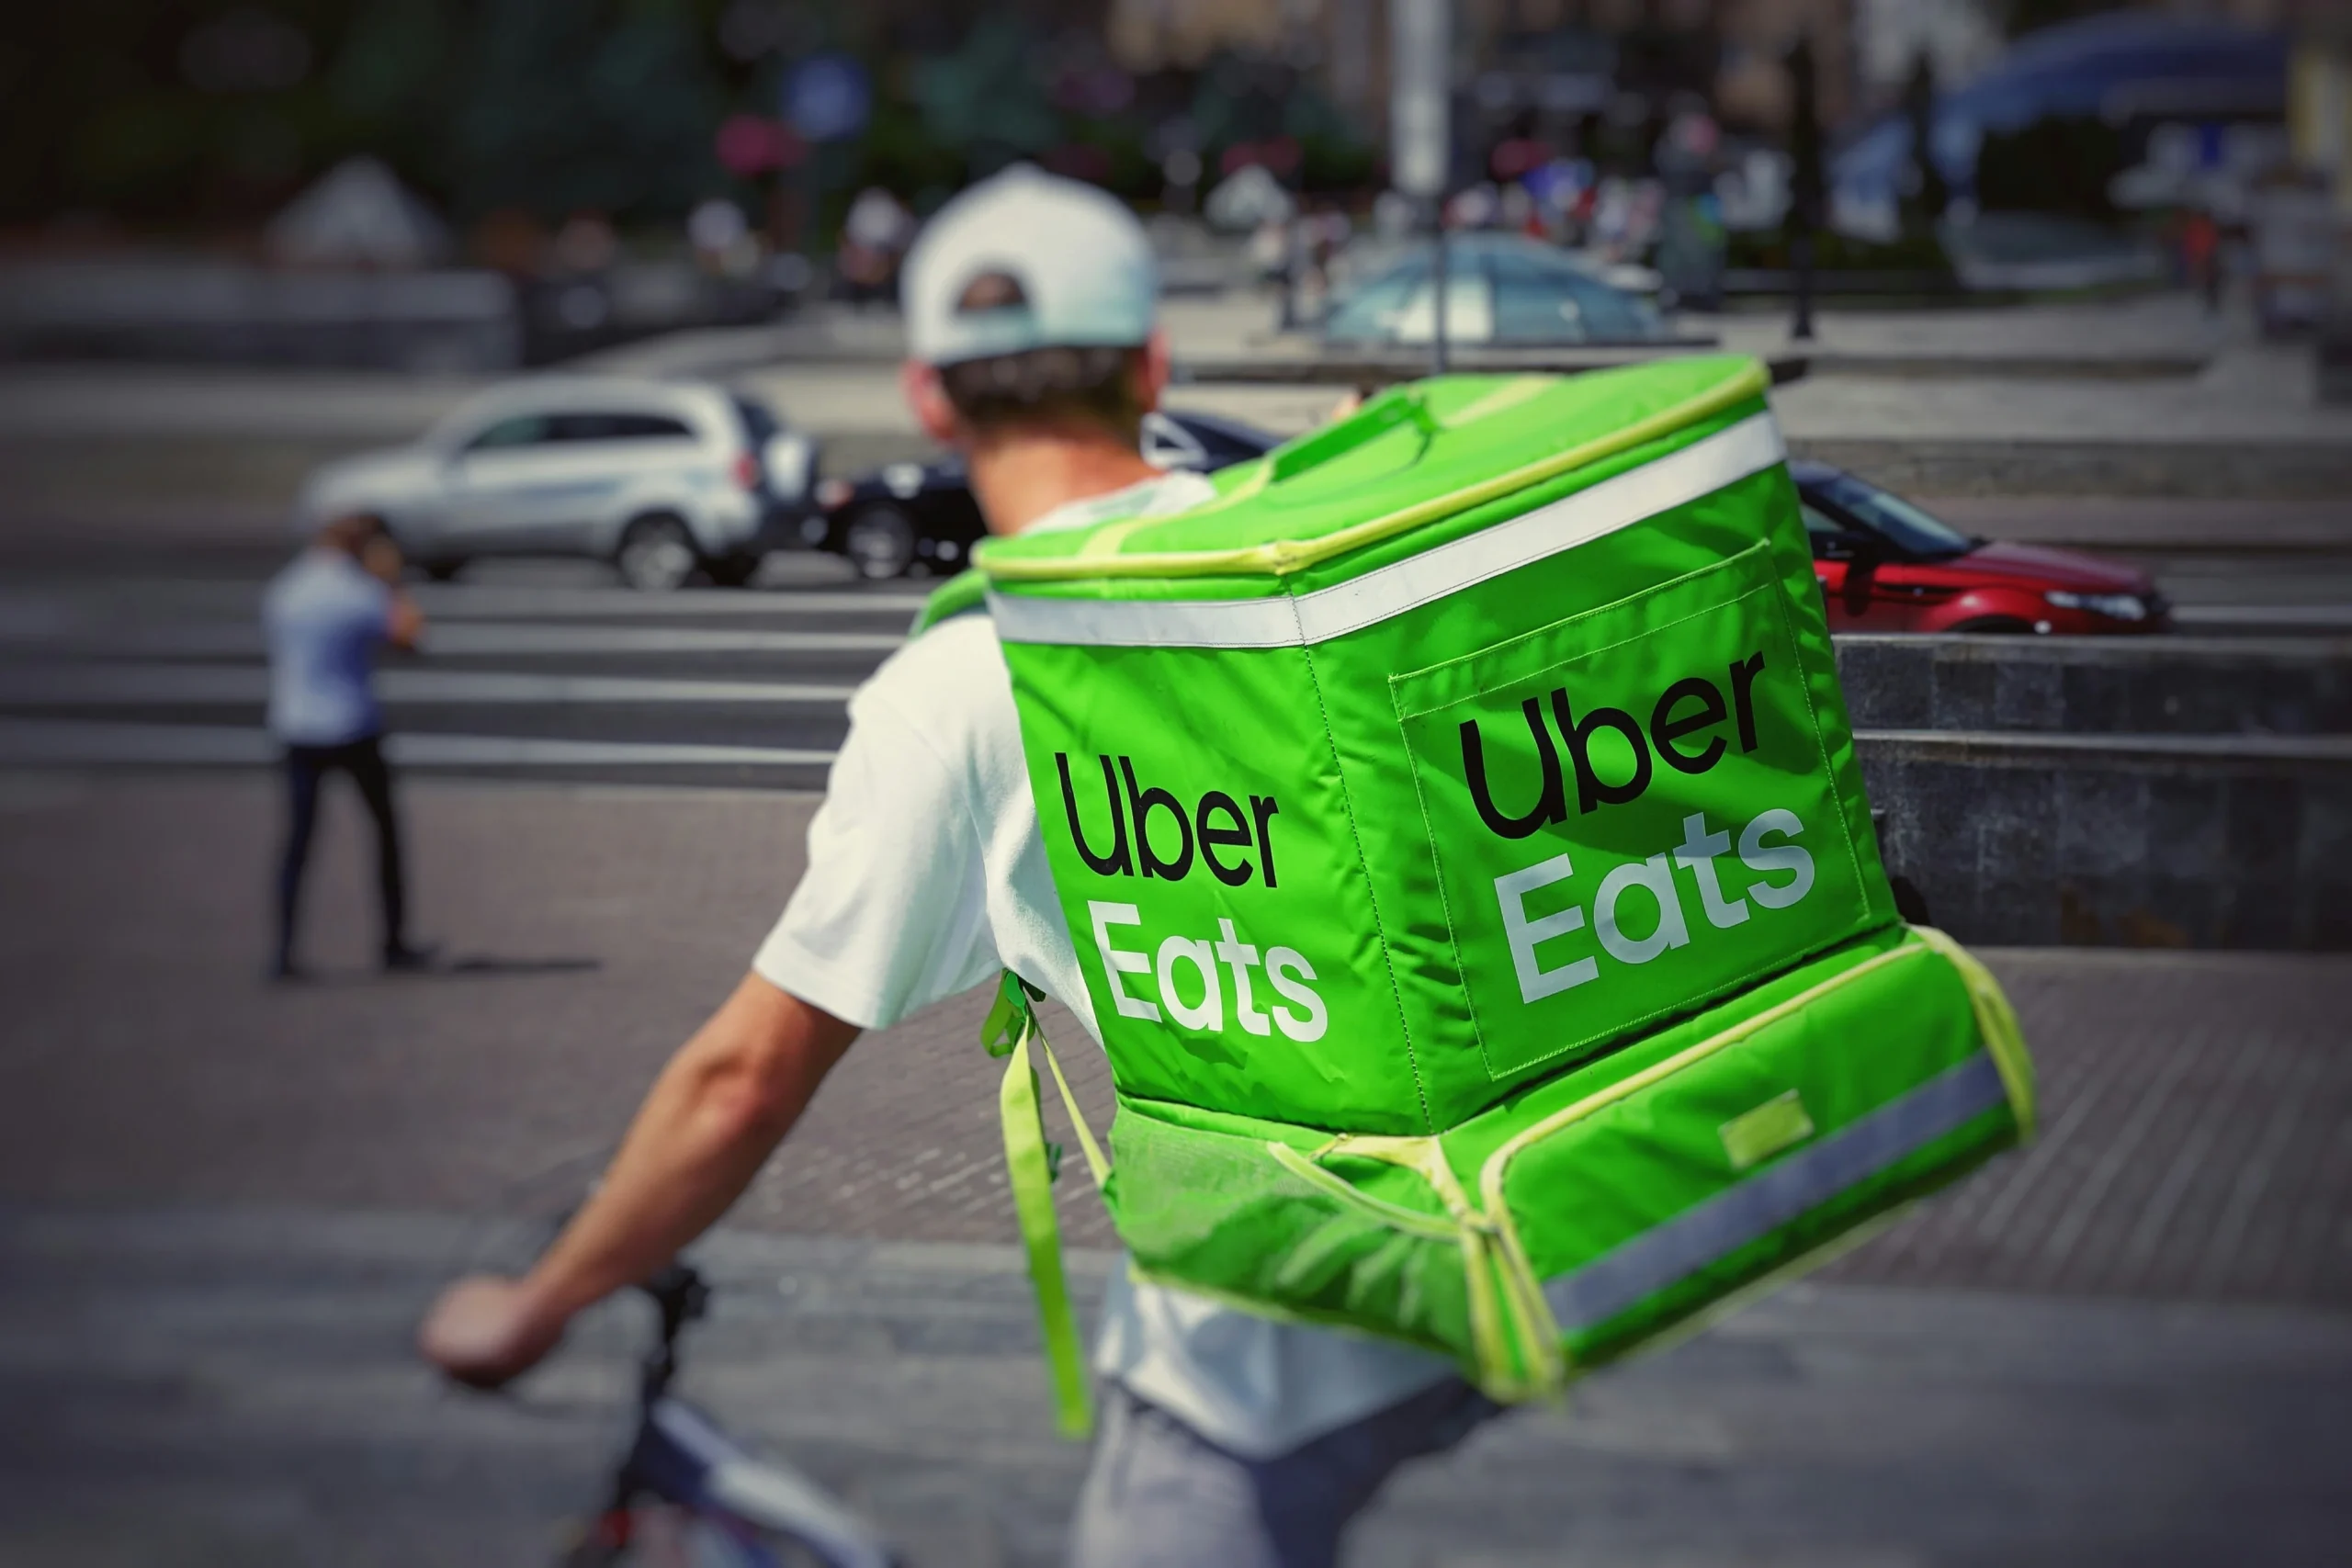 An uber eats delivery man on a bike with a green bag. 